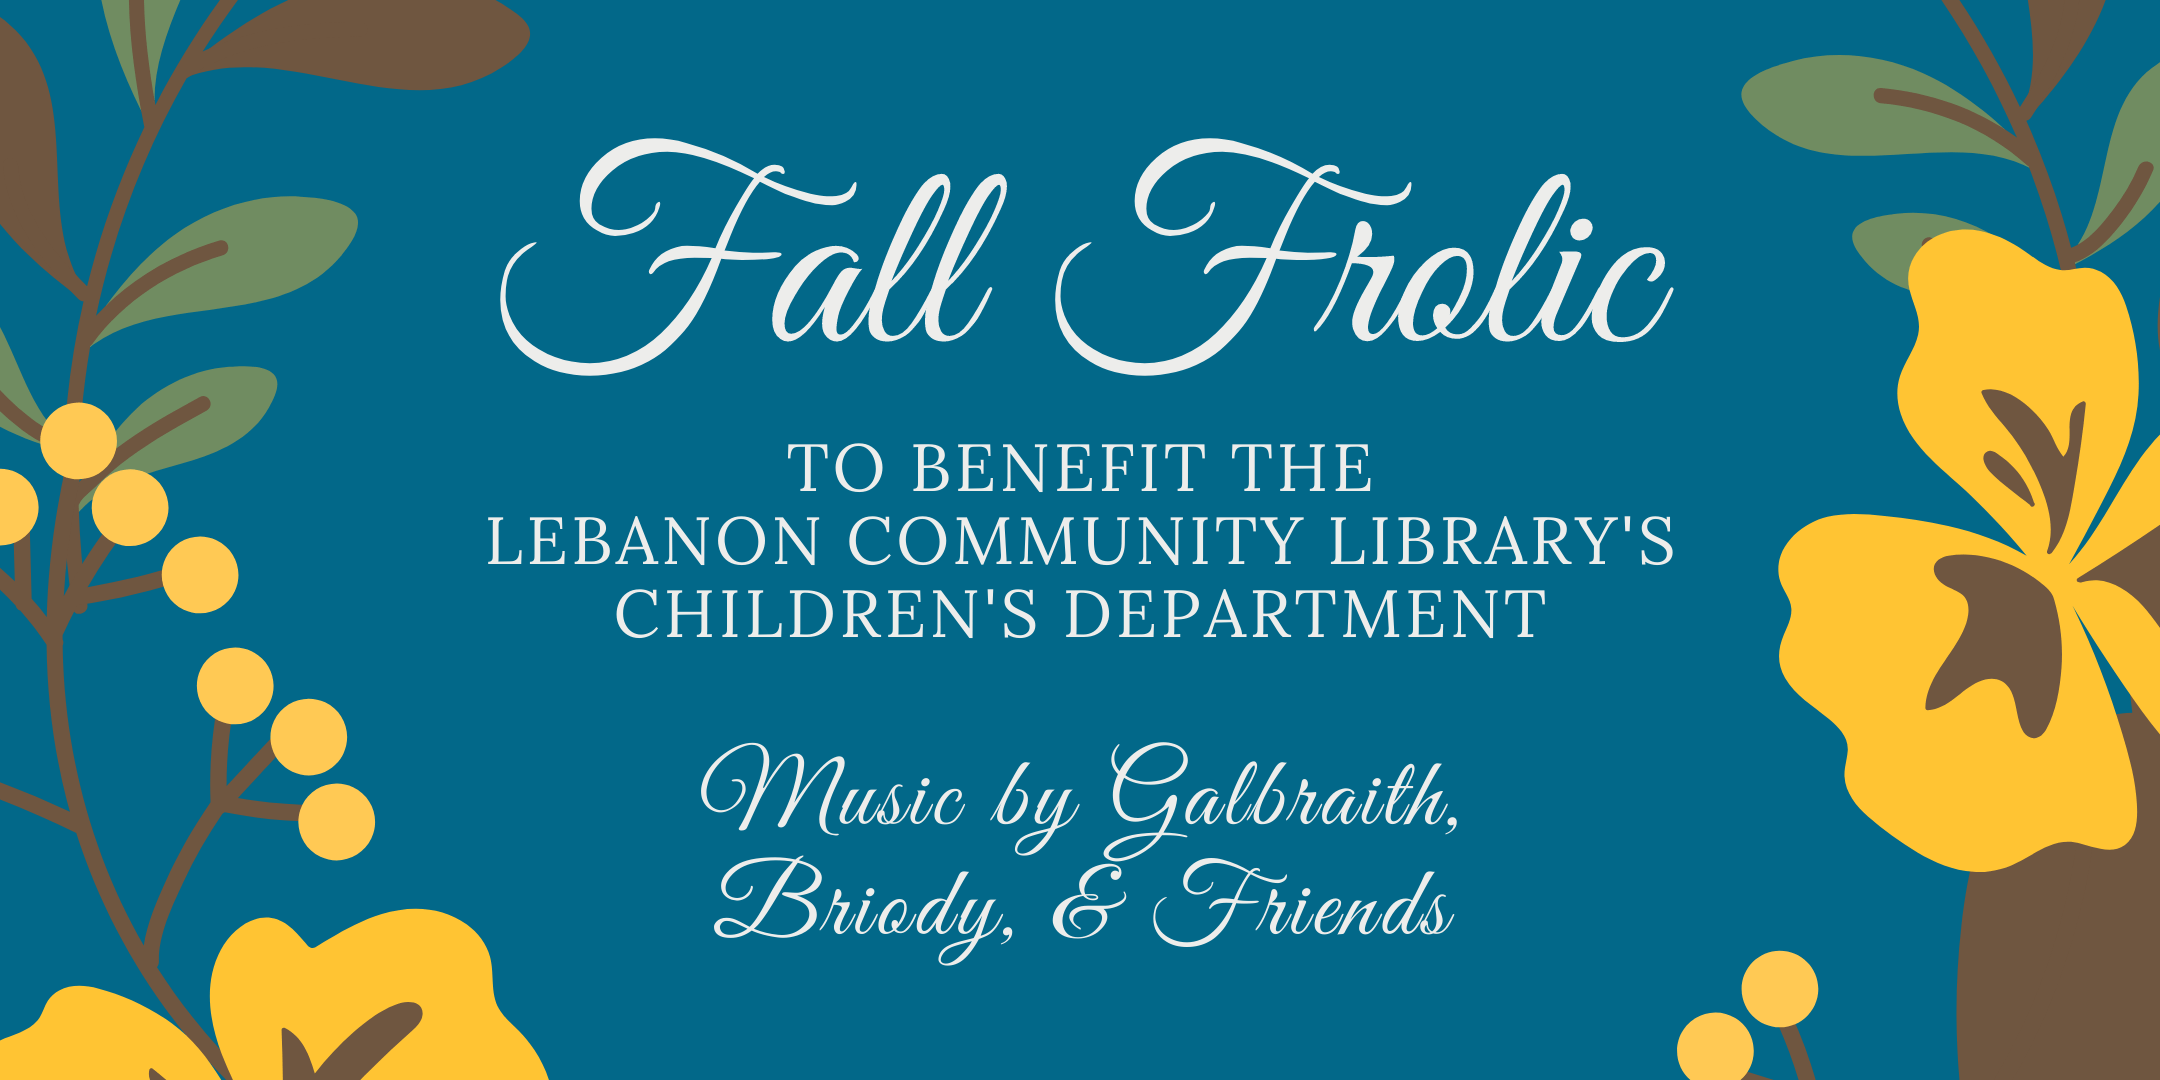 Fall Frolic. To benefit the library's children's department. Music by Galbraith, Briody, & Friends.